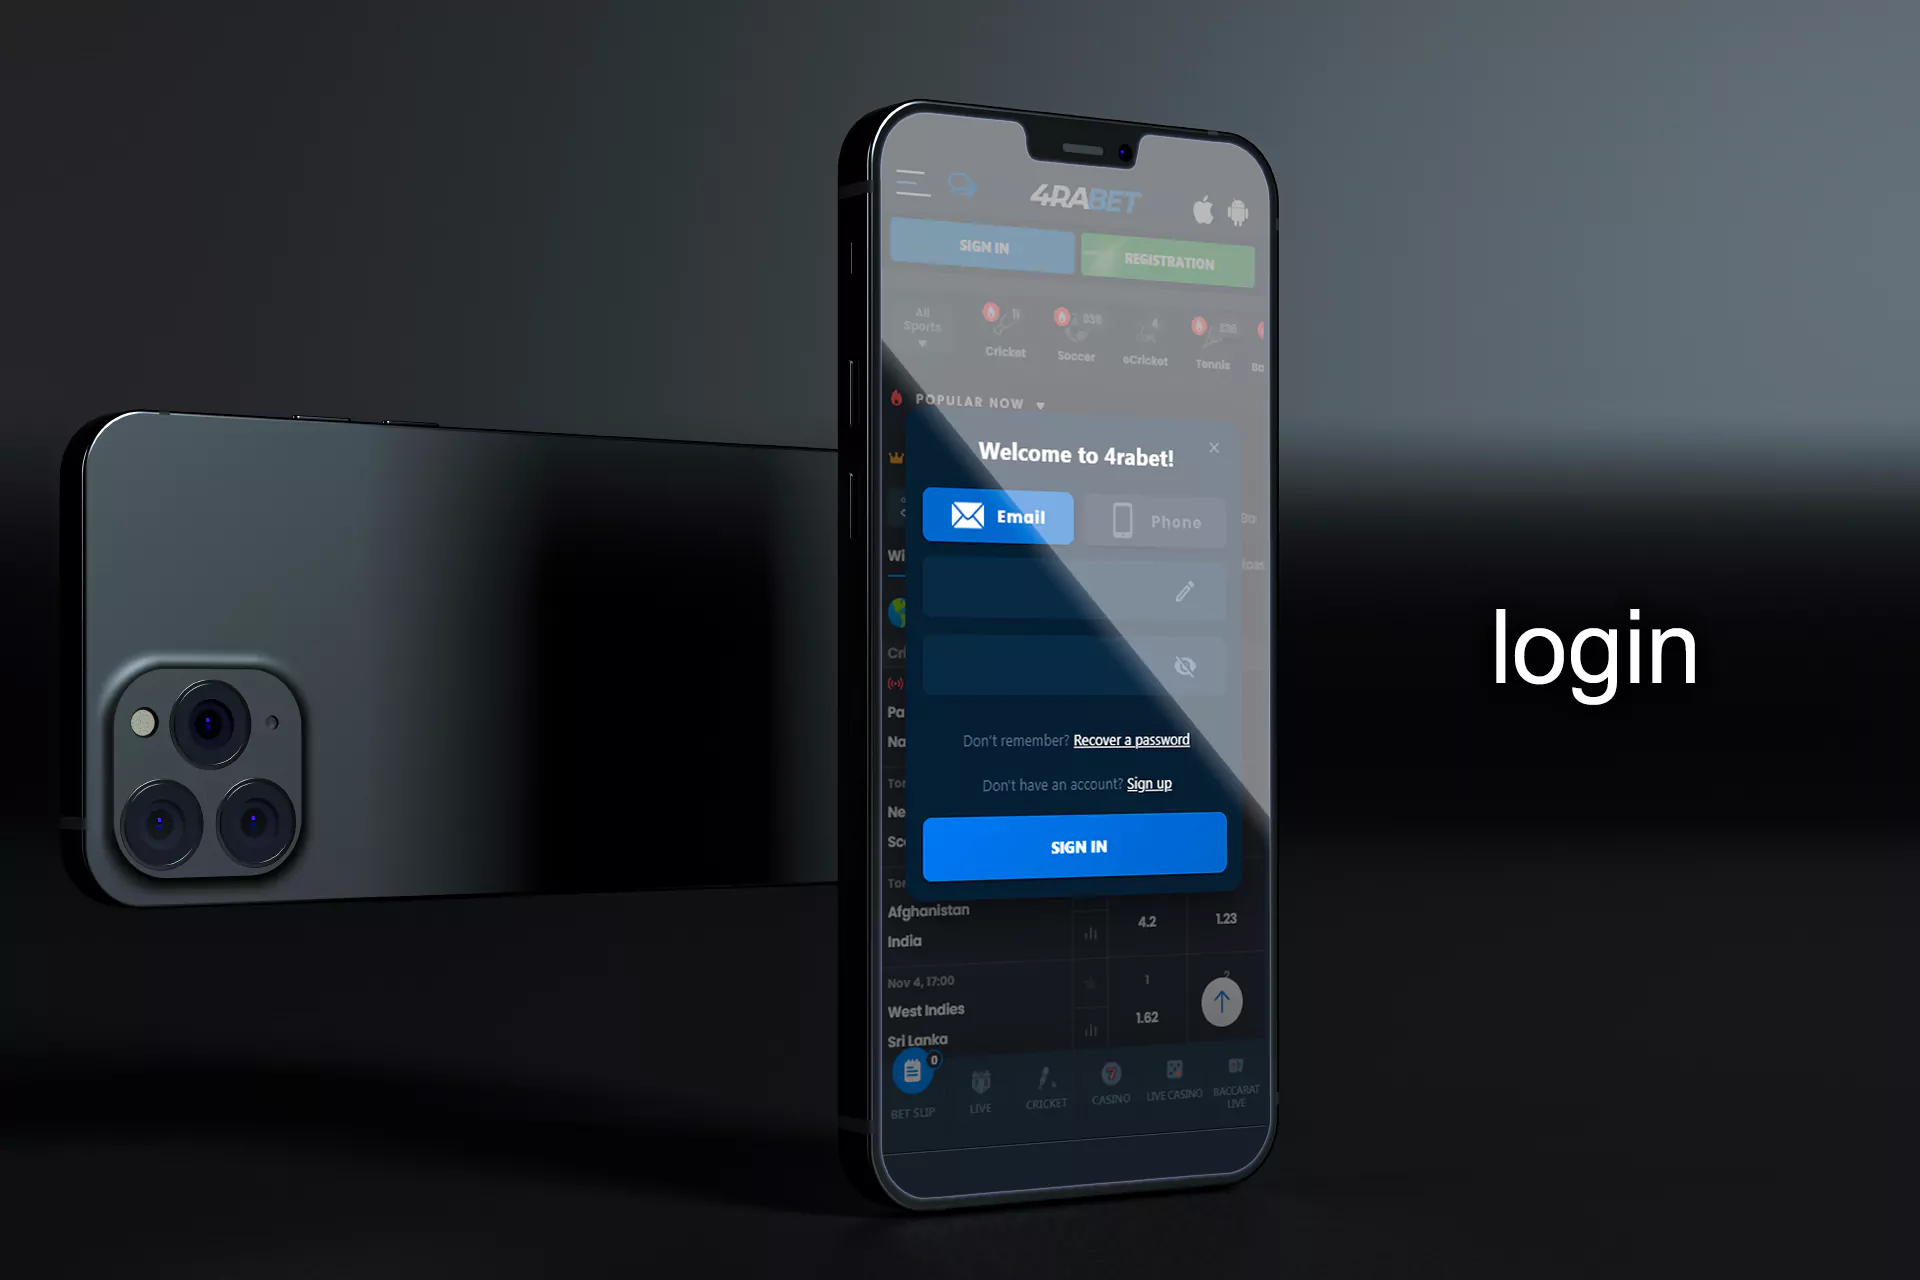 Run the app and enter your login and password.